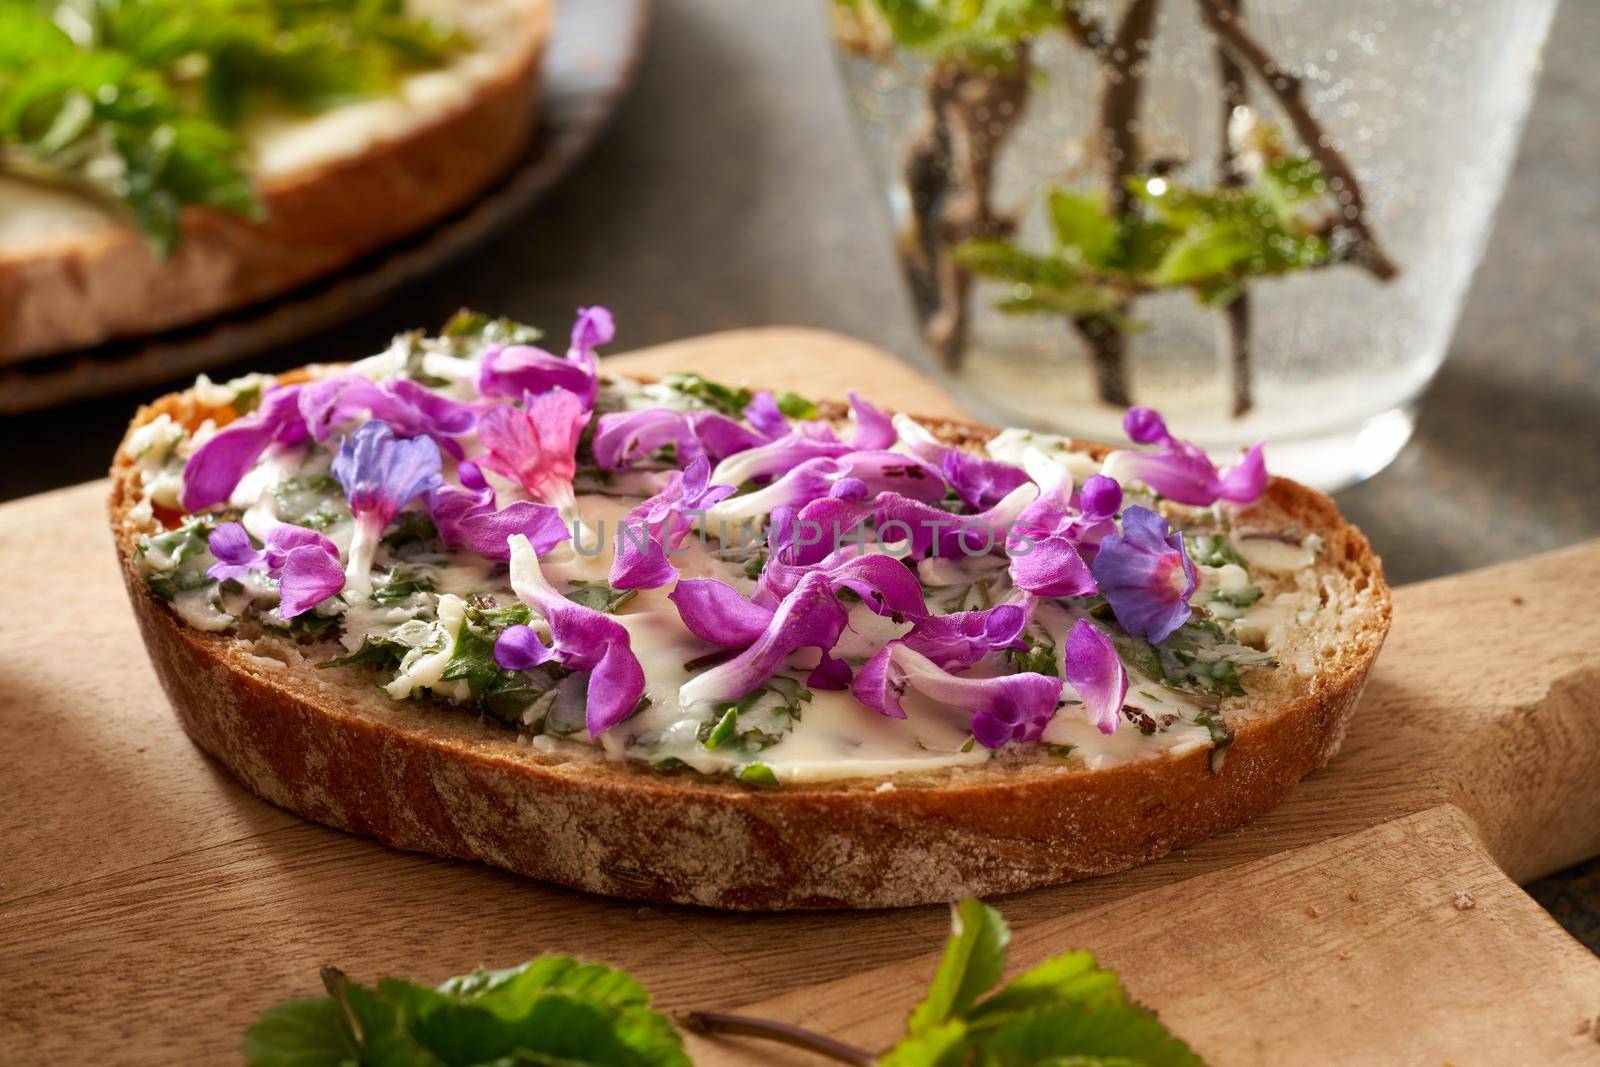 Slice of bread with spring wild edible plants - young ground elder leaves, purple dead-nettle and lungwort flowers by madeleine_steinbach